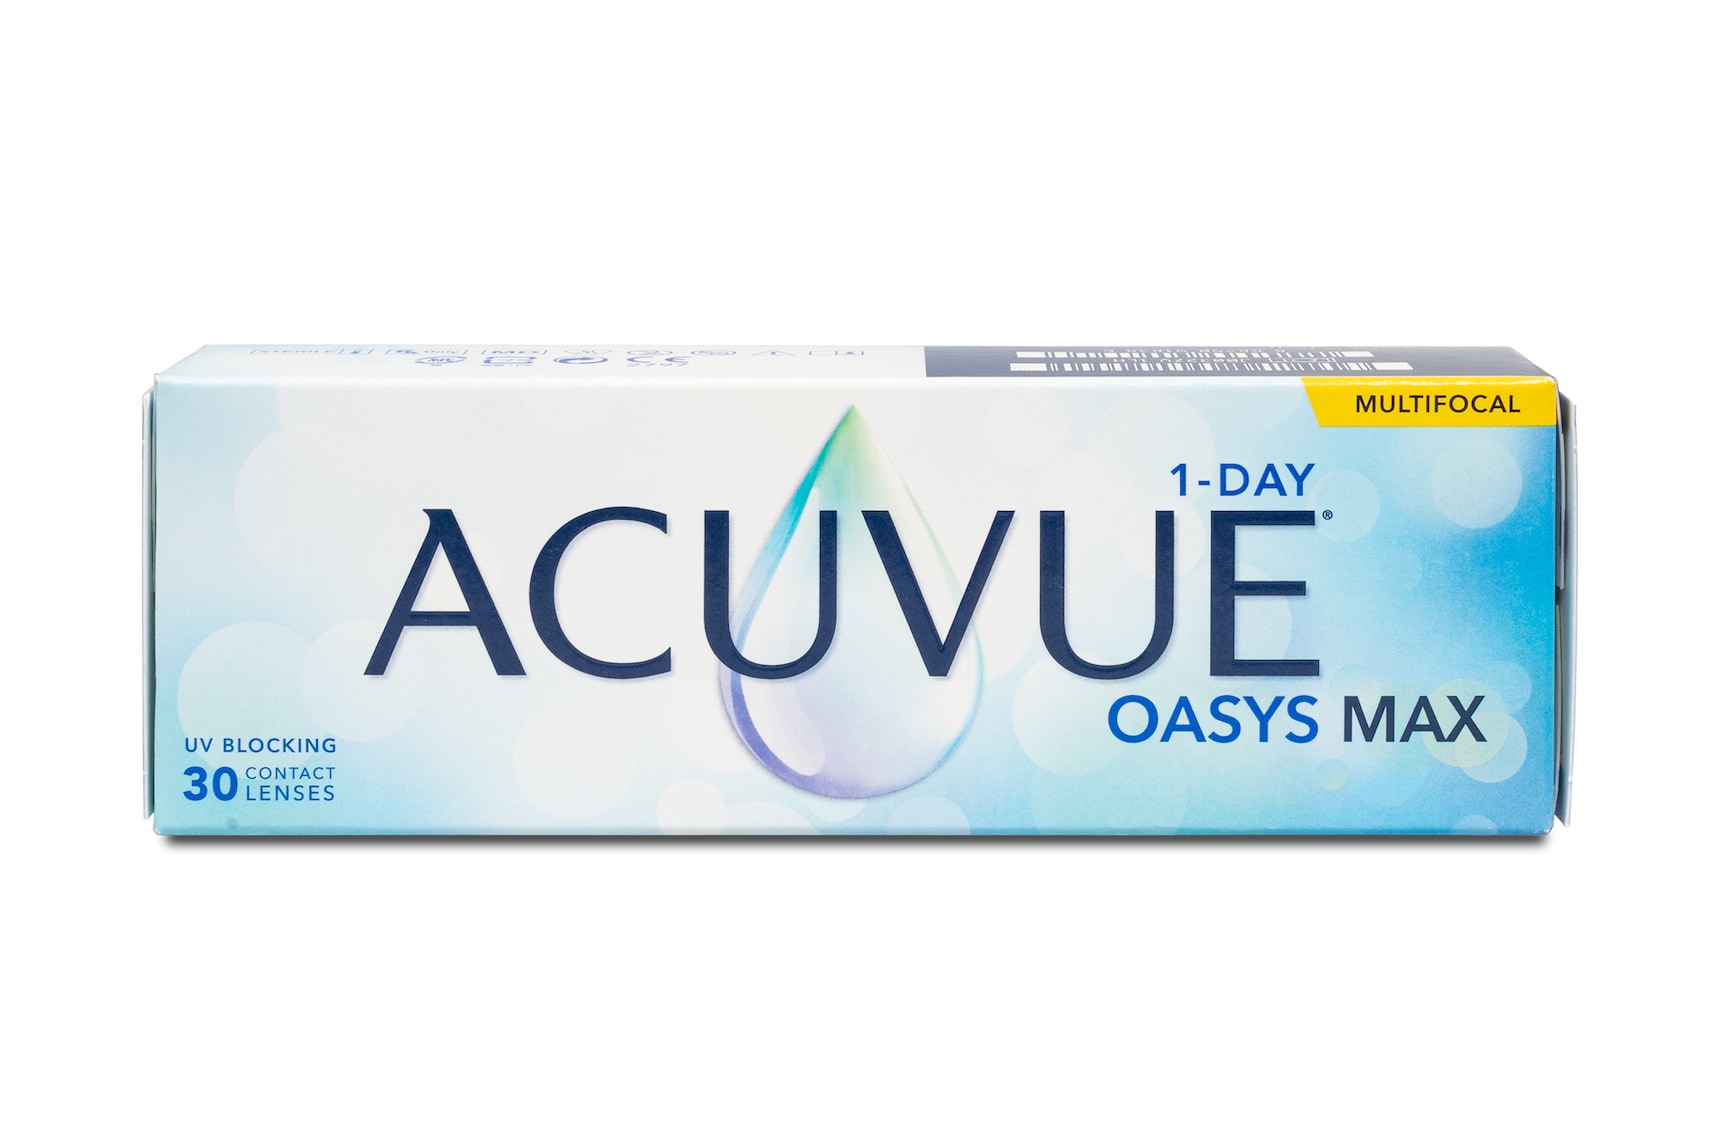 Acuvue Oasys 1-Day Max MULTI